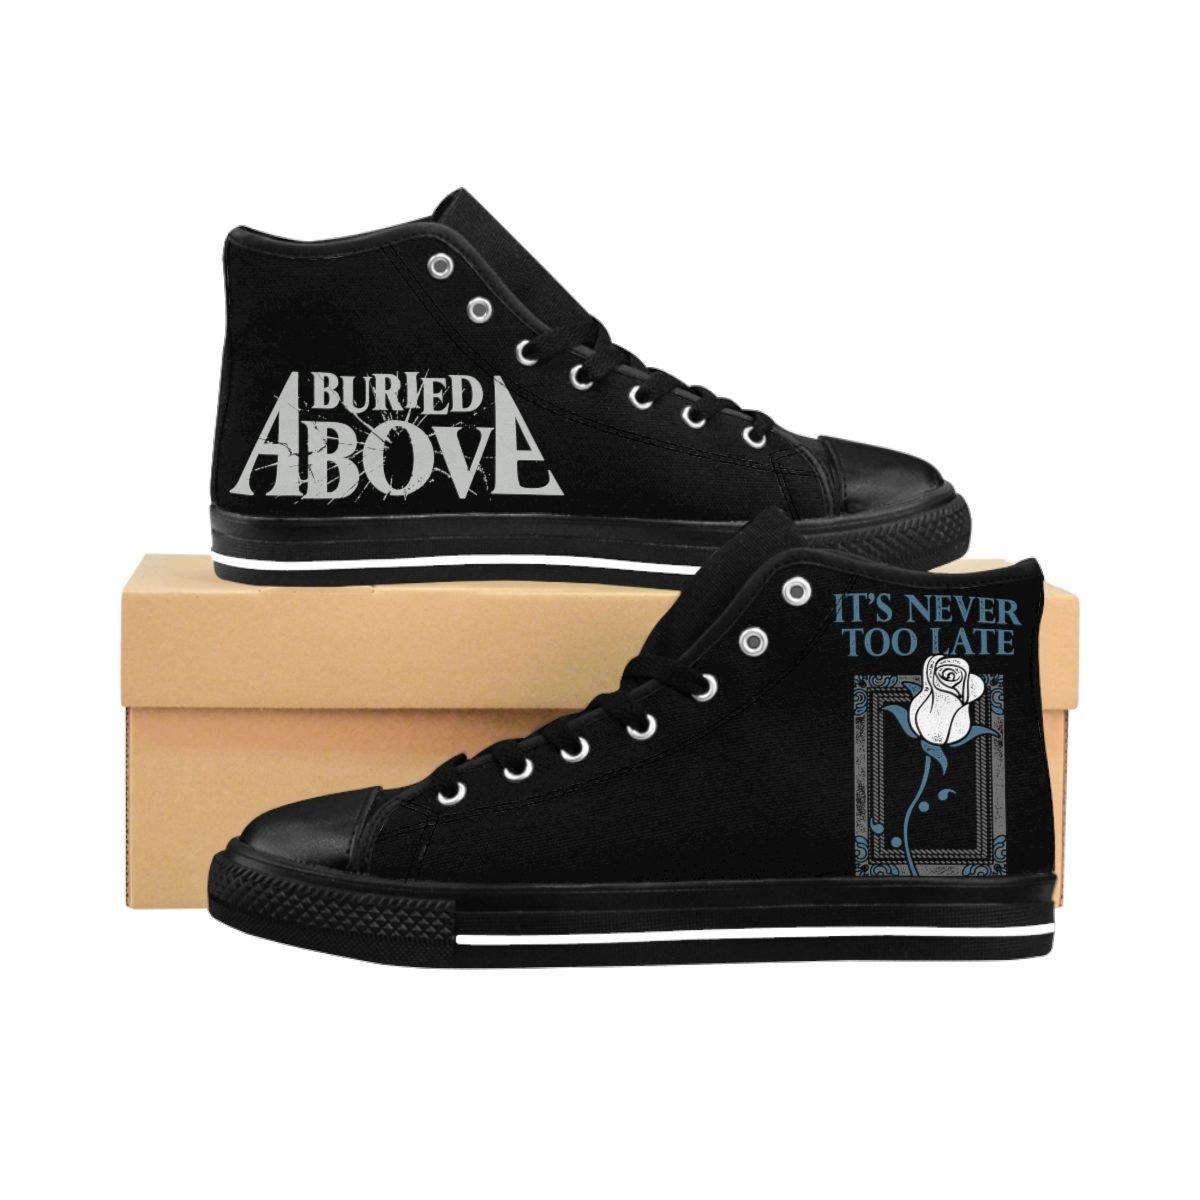 Buried Above – It’s Never Too Late Men’s High-top Sneakers